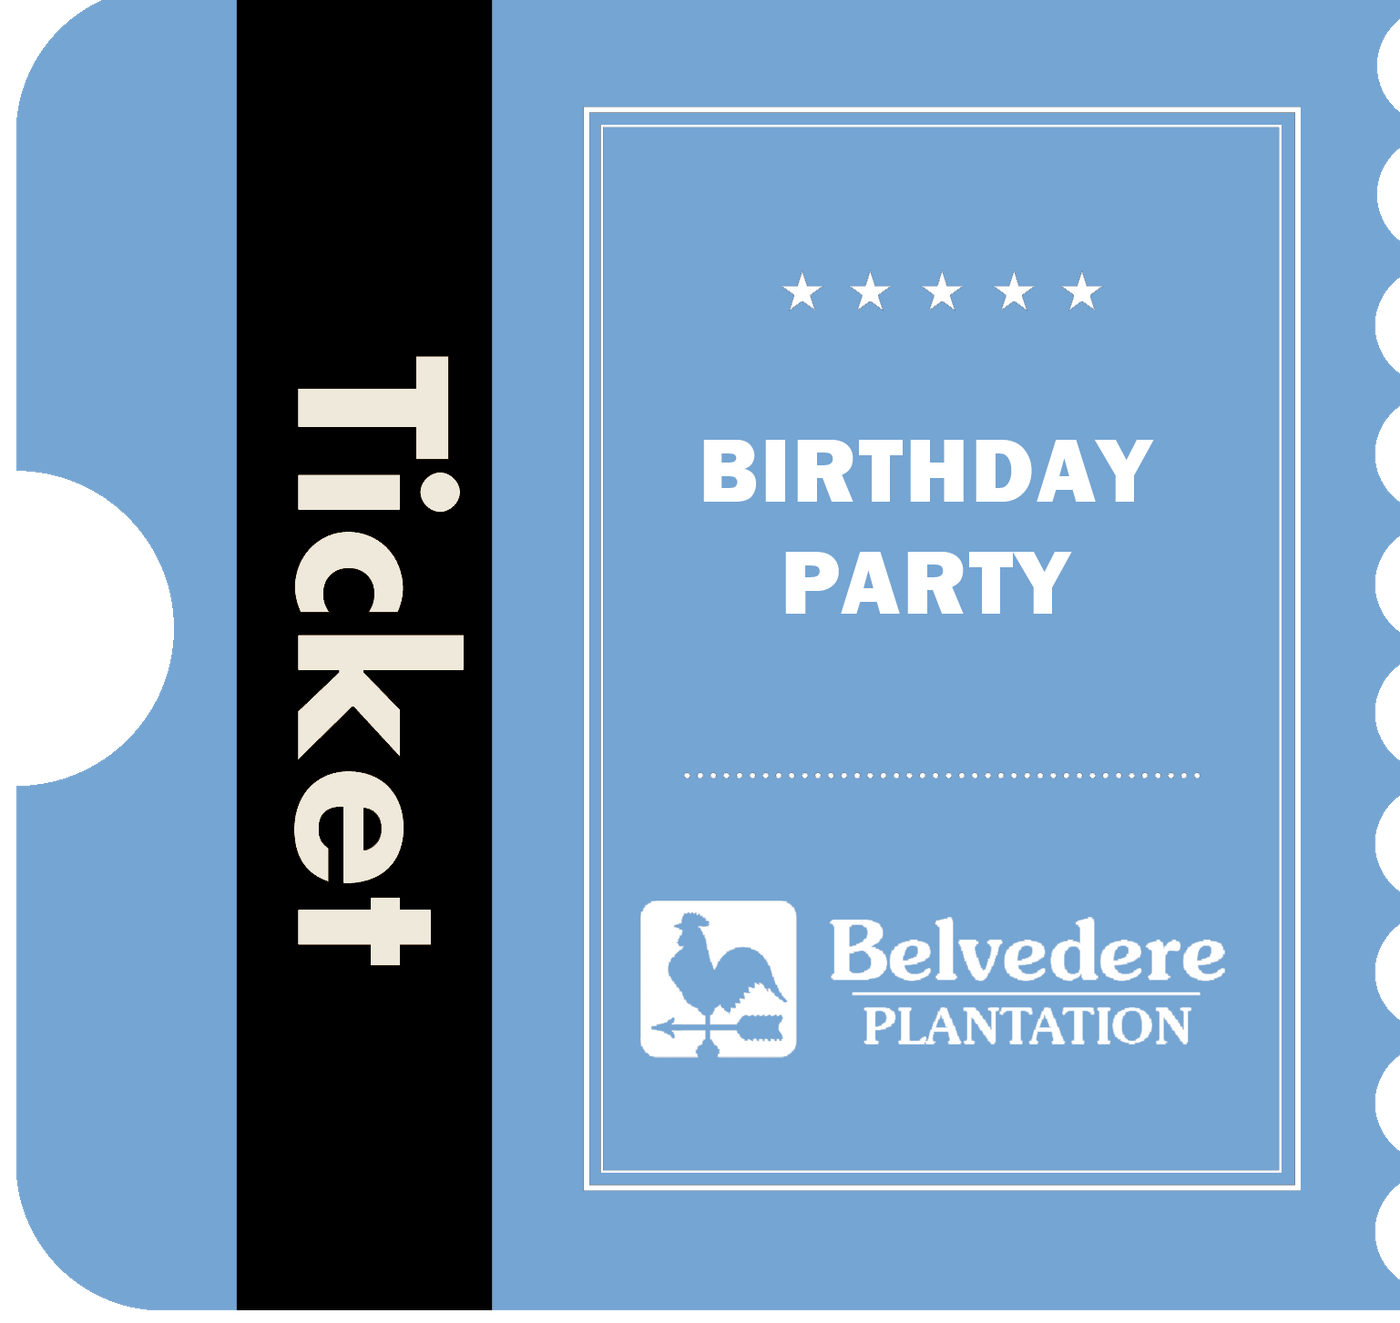 Deluxe Birthday Party Package